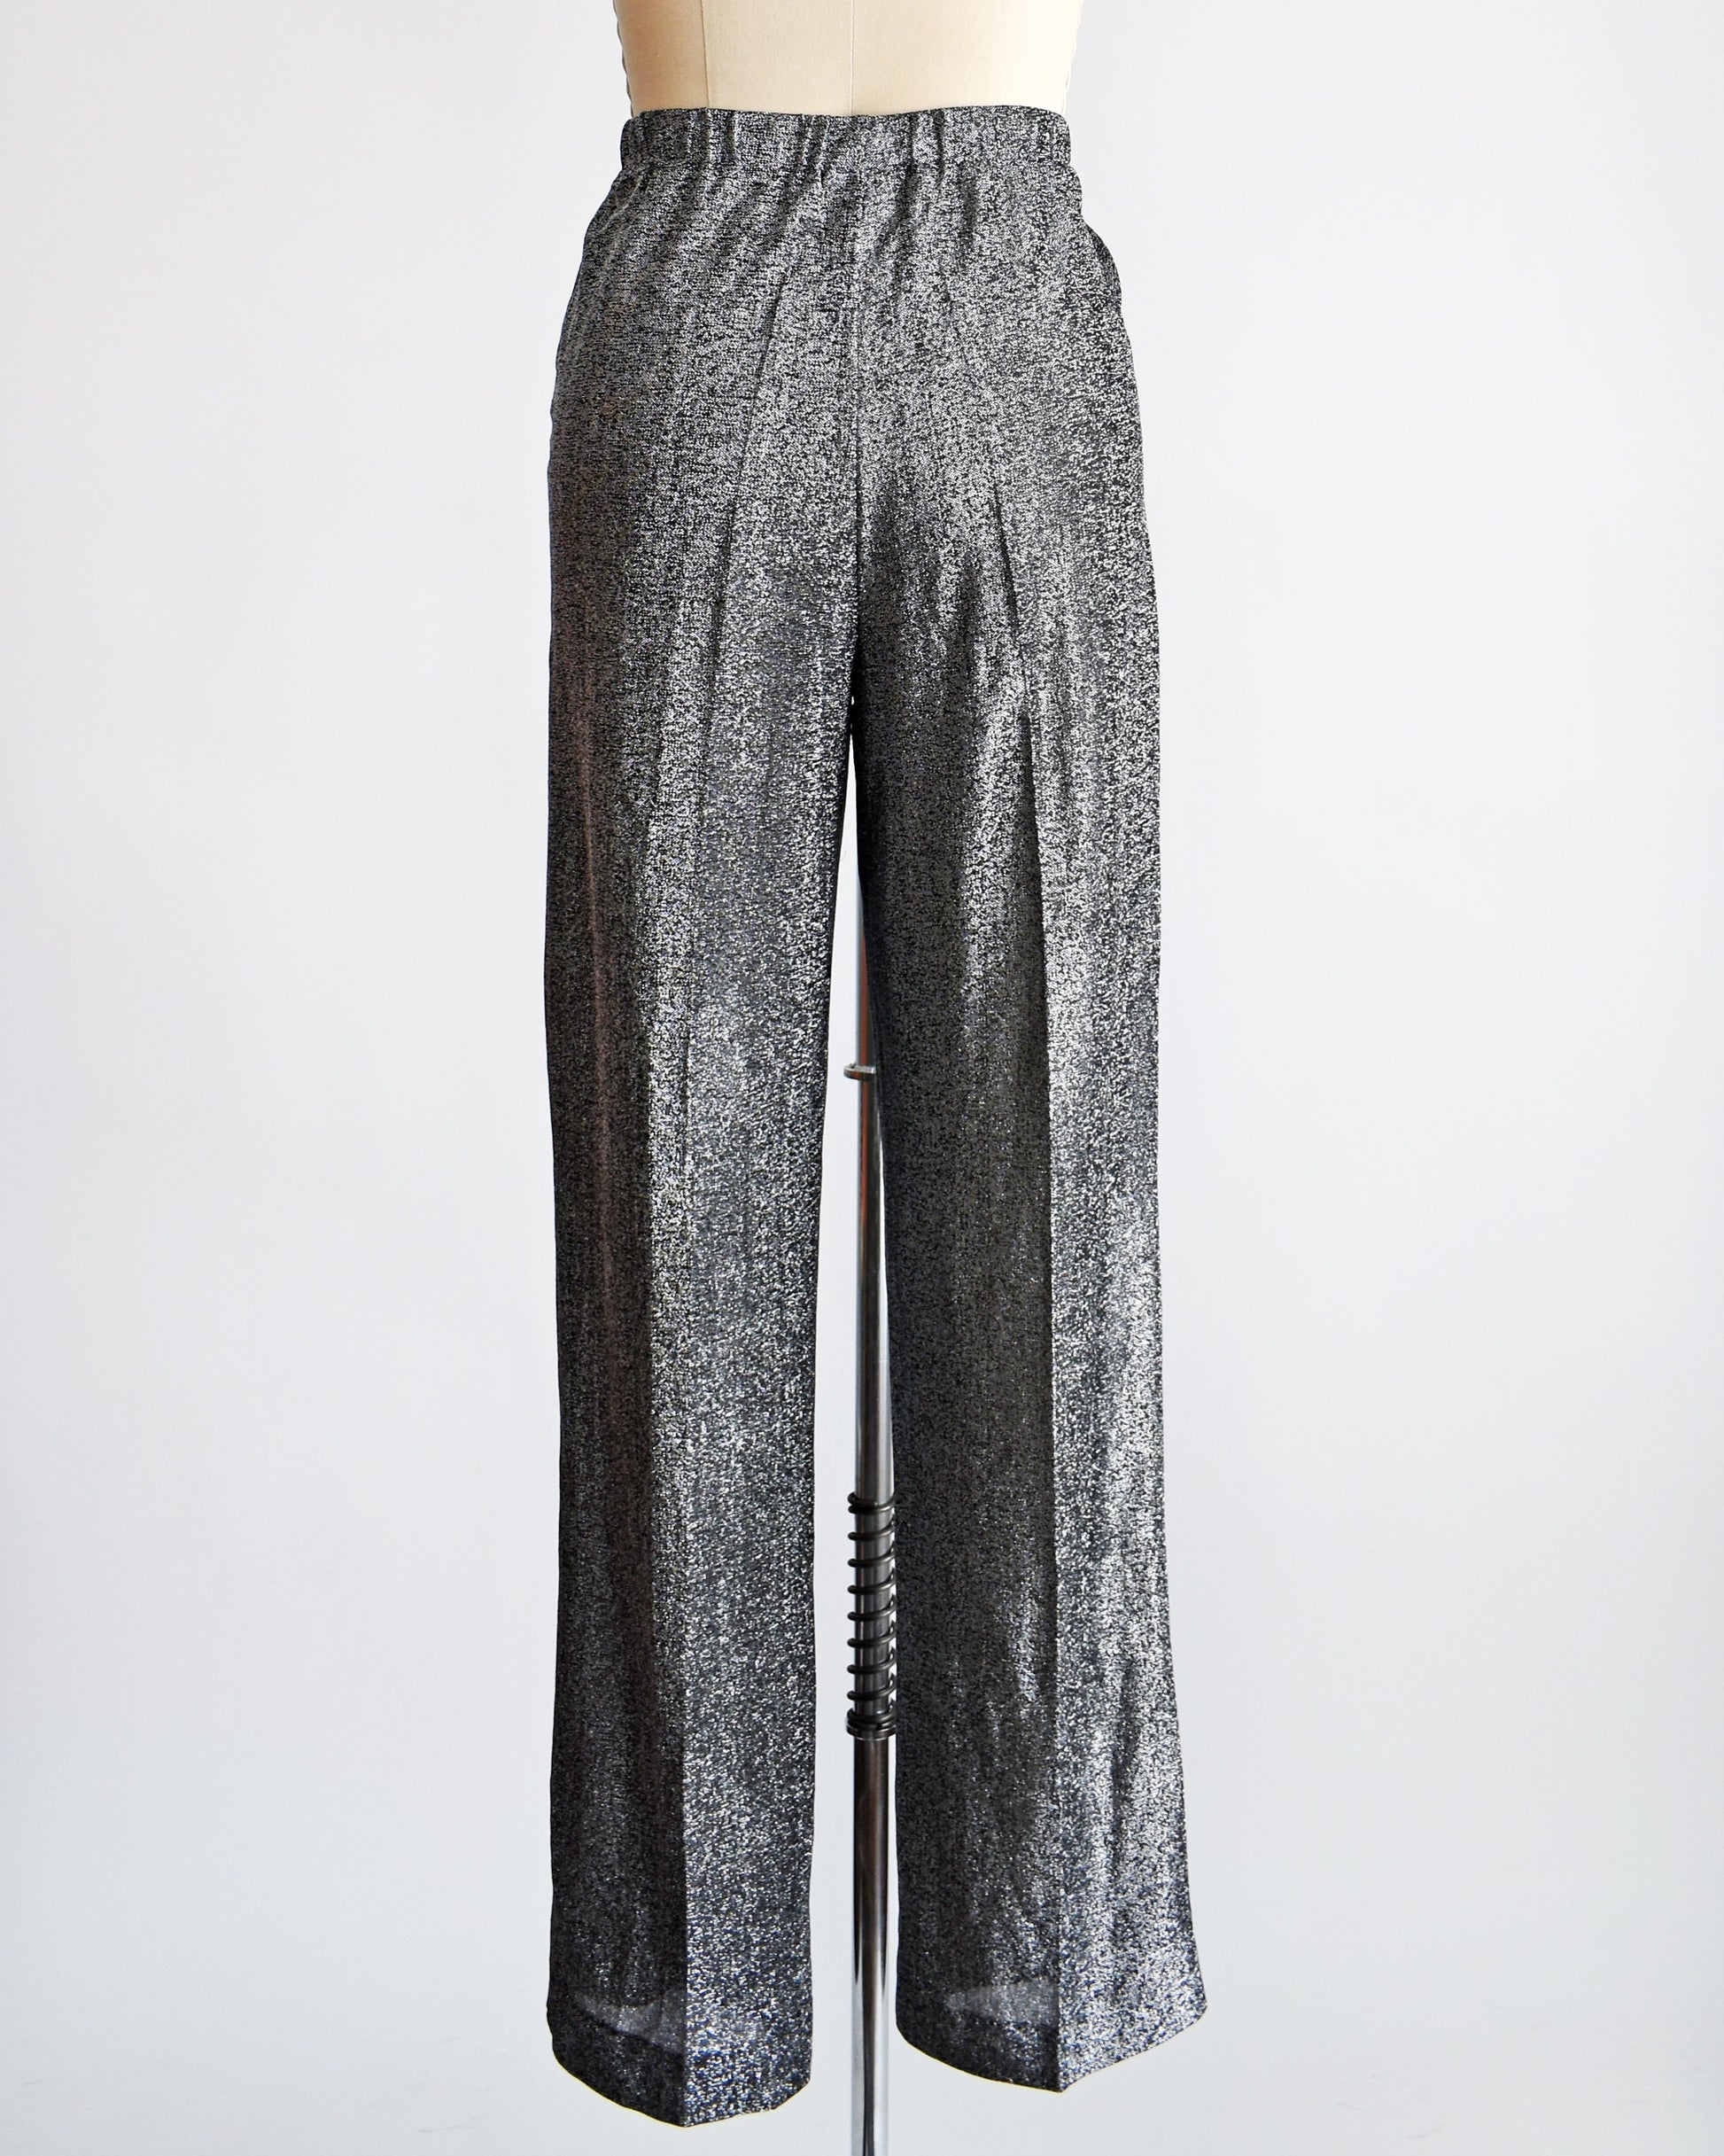 Back view of a vintage pair of 70s silver and black metallic pants on a dress form.